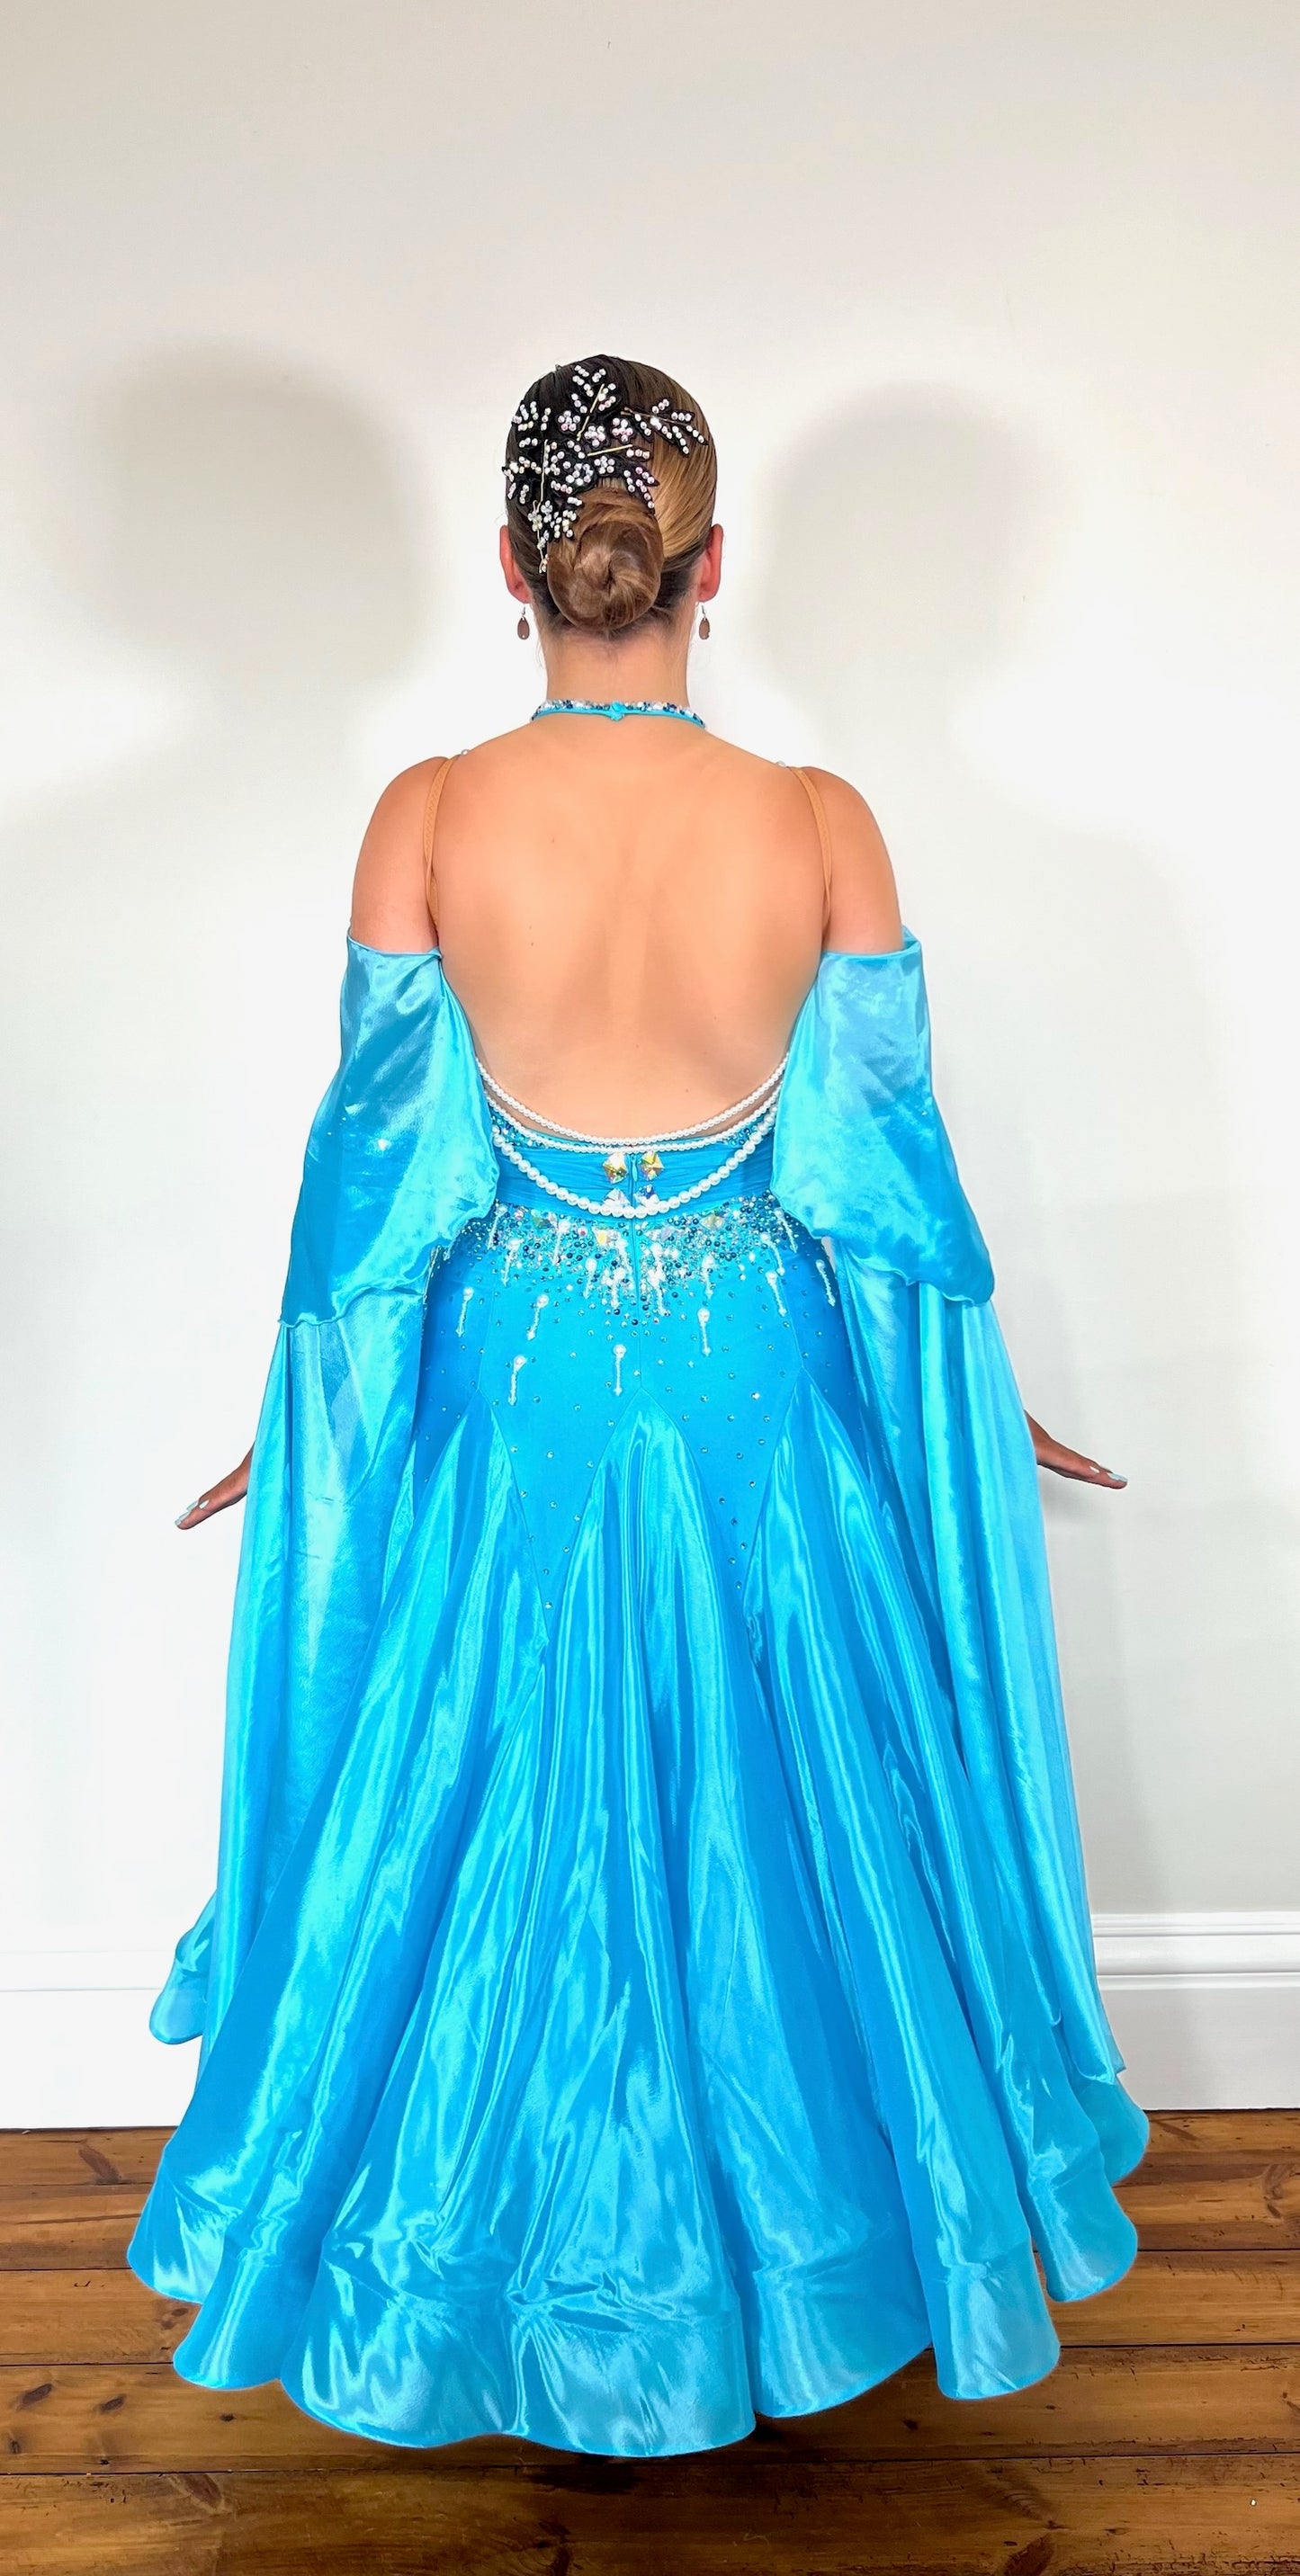 322 Paradise Blue Ballroom Dress with shoulder drapes. Comes with separate arm cuff floats. Decorated with Pearls, blue and AB stones. Detailed pearl strings to back